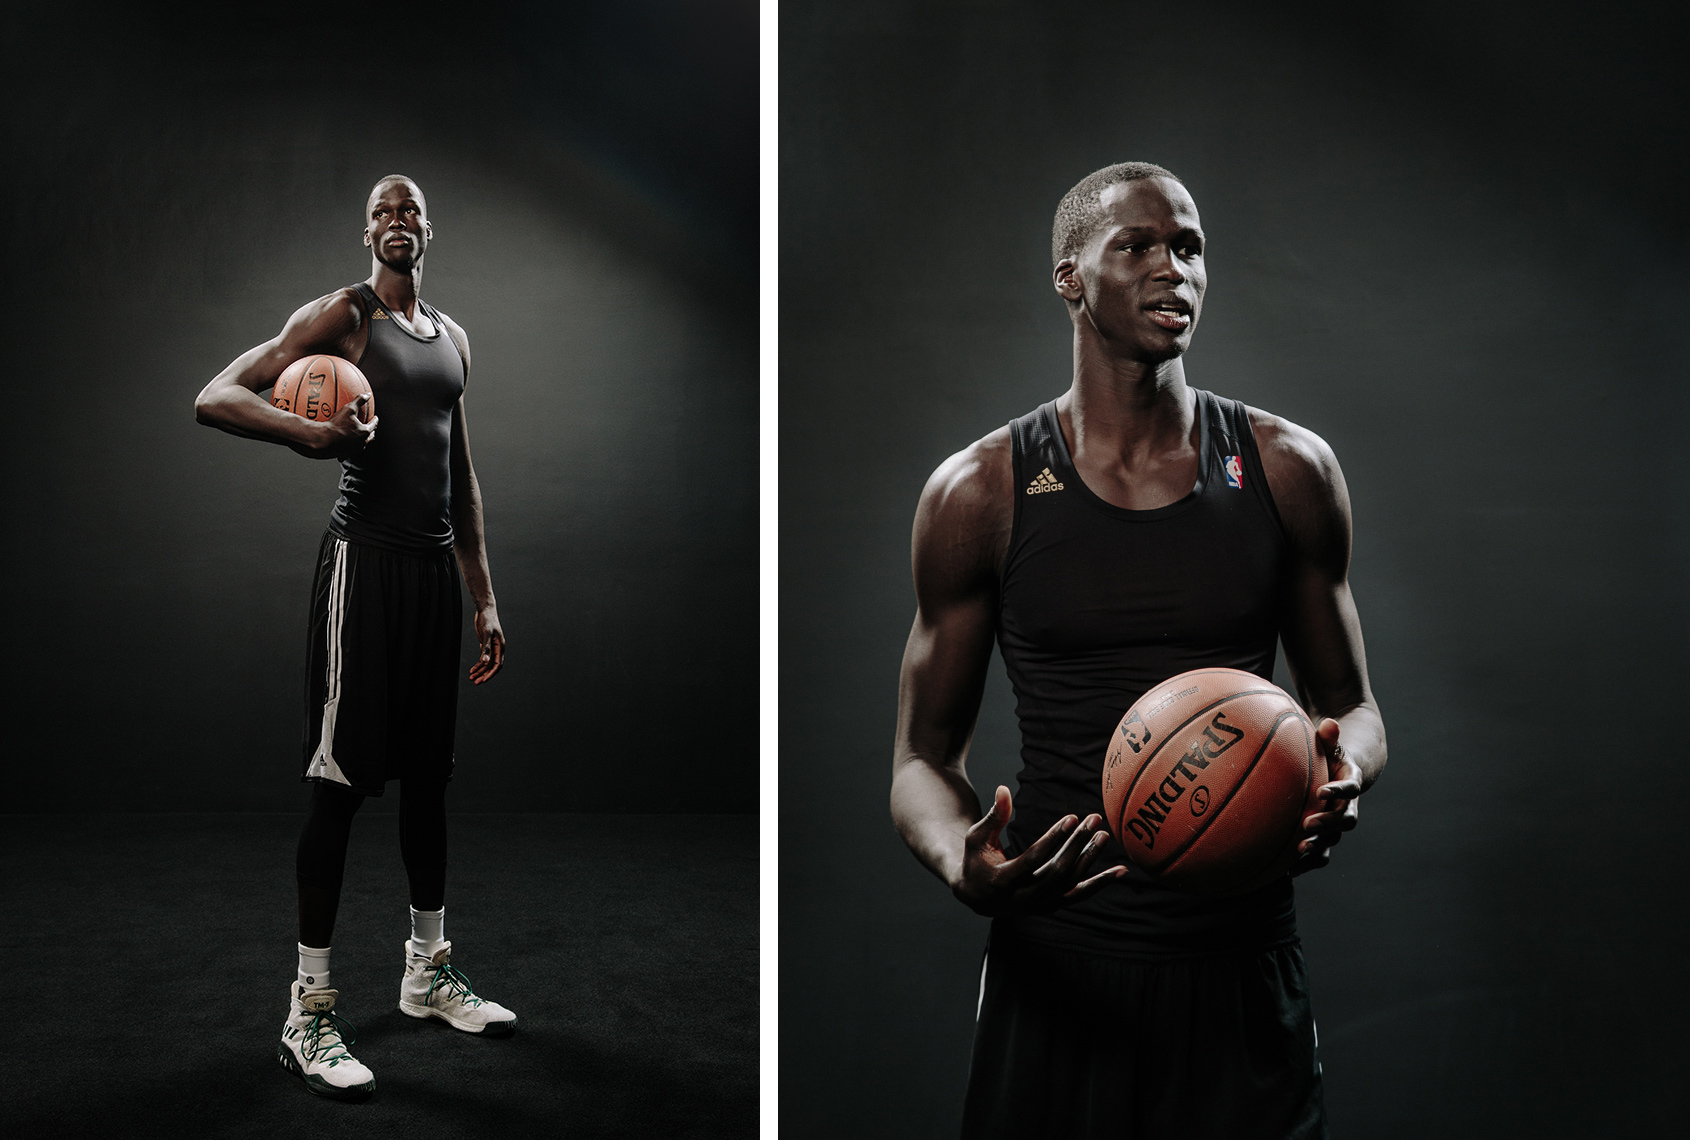 editorial sports photographer - portraits of Thon Maker holding a basketball when he was 19 years old